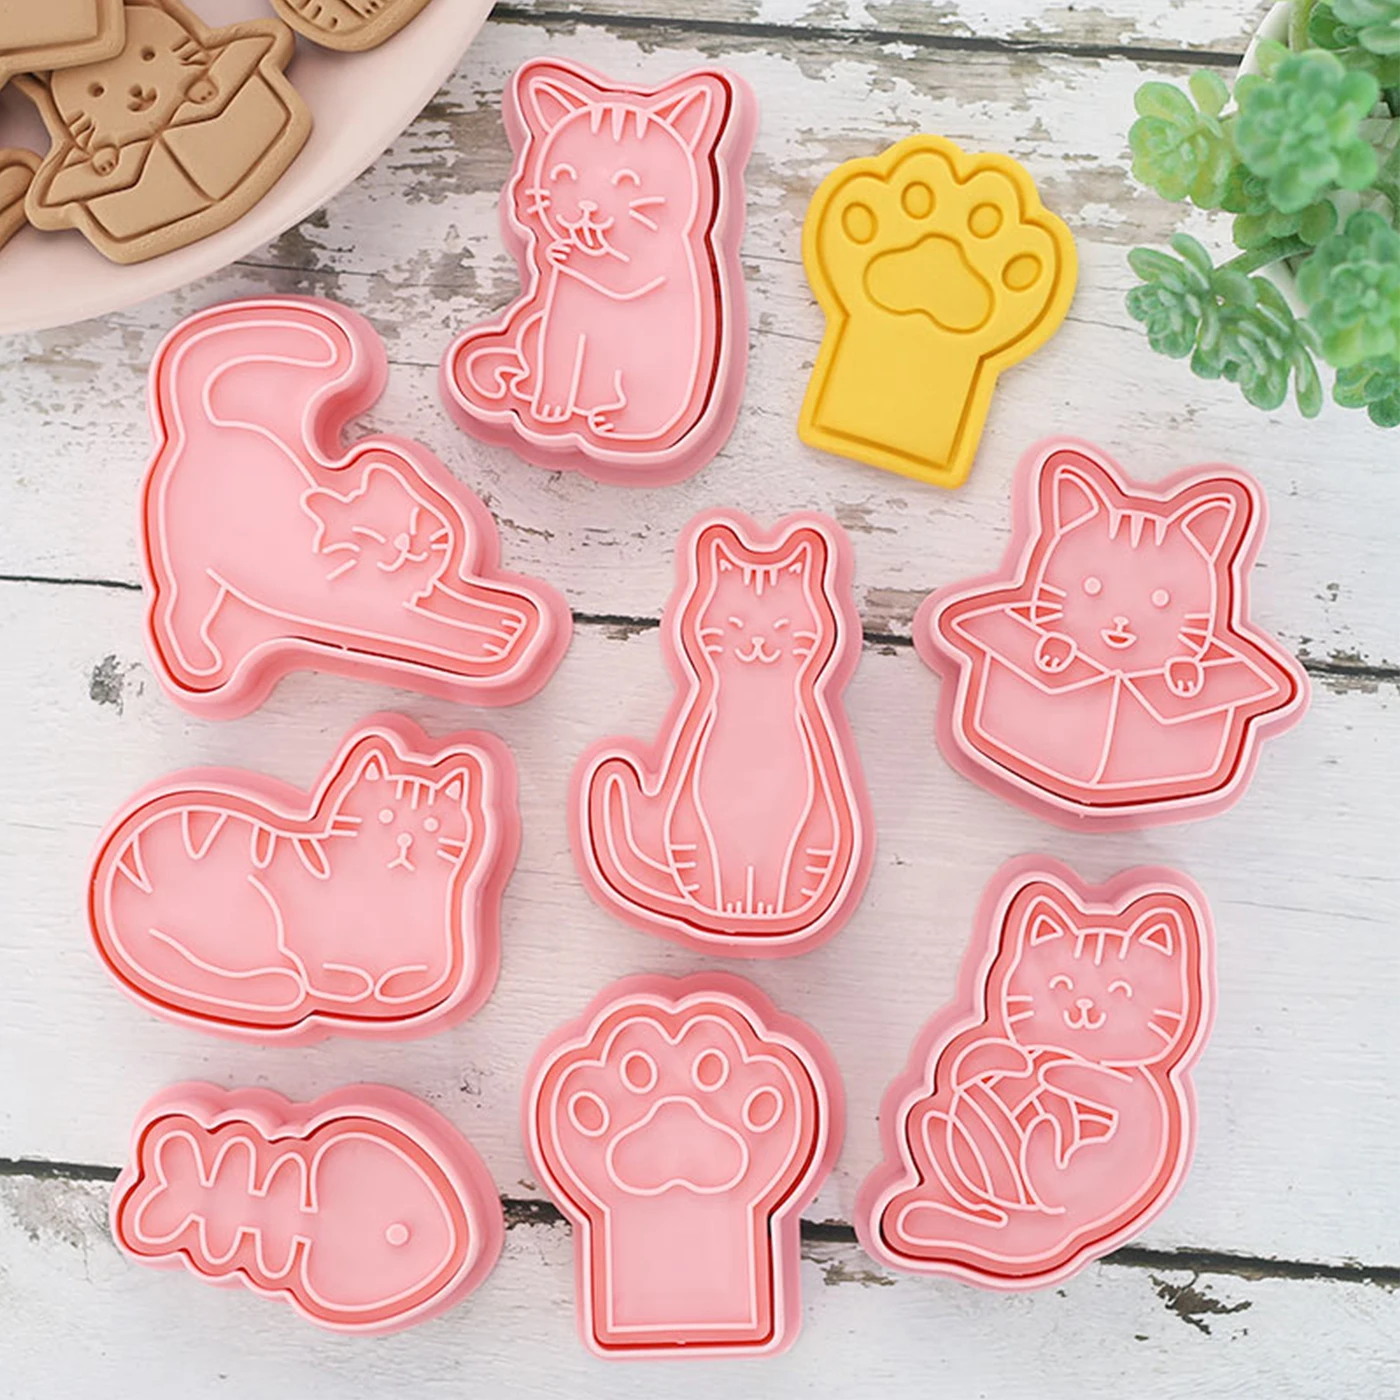 8 Pcs/Set DIY Kitchen Cat Cookie Mold Cartoon Biscuit Mould Cutter 3D Biscuits ABS Plastic Baking Mould Cookie Decorating Tool images - 6